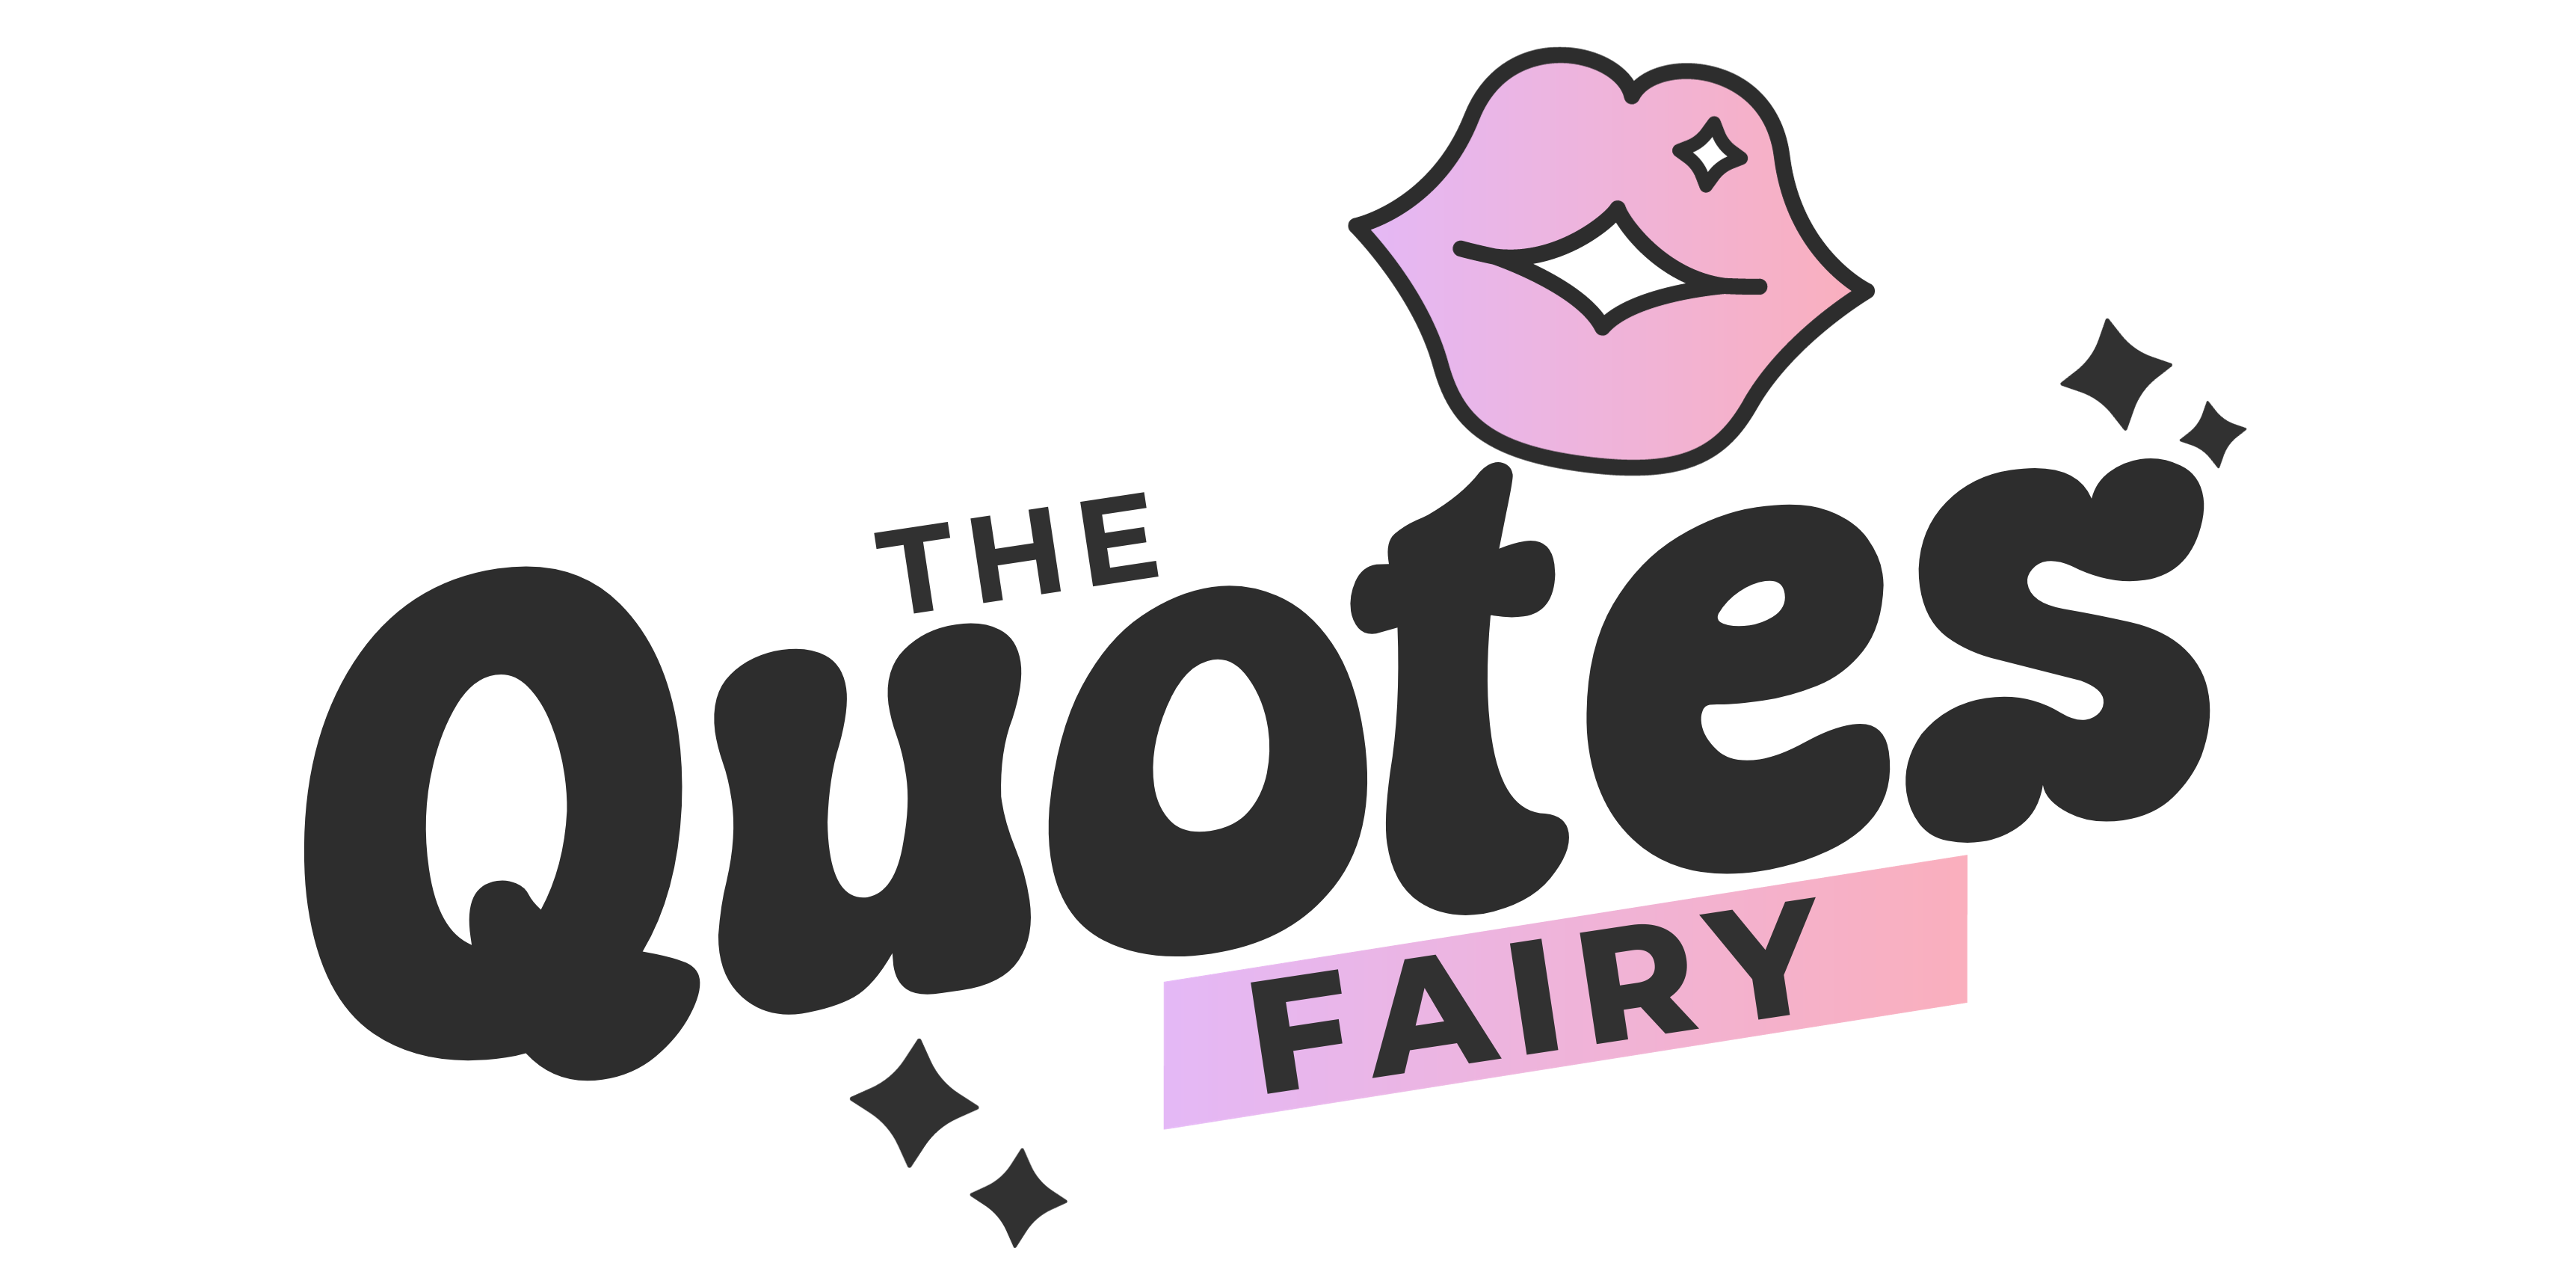 The Quotes Fairy